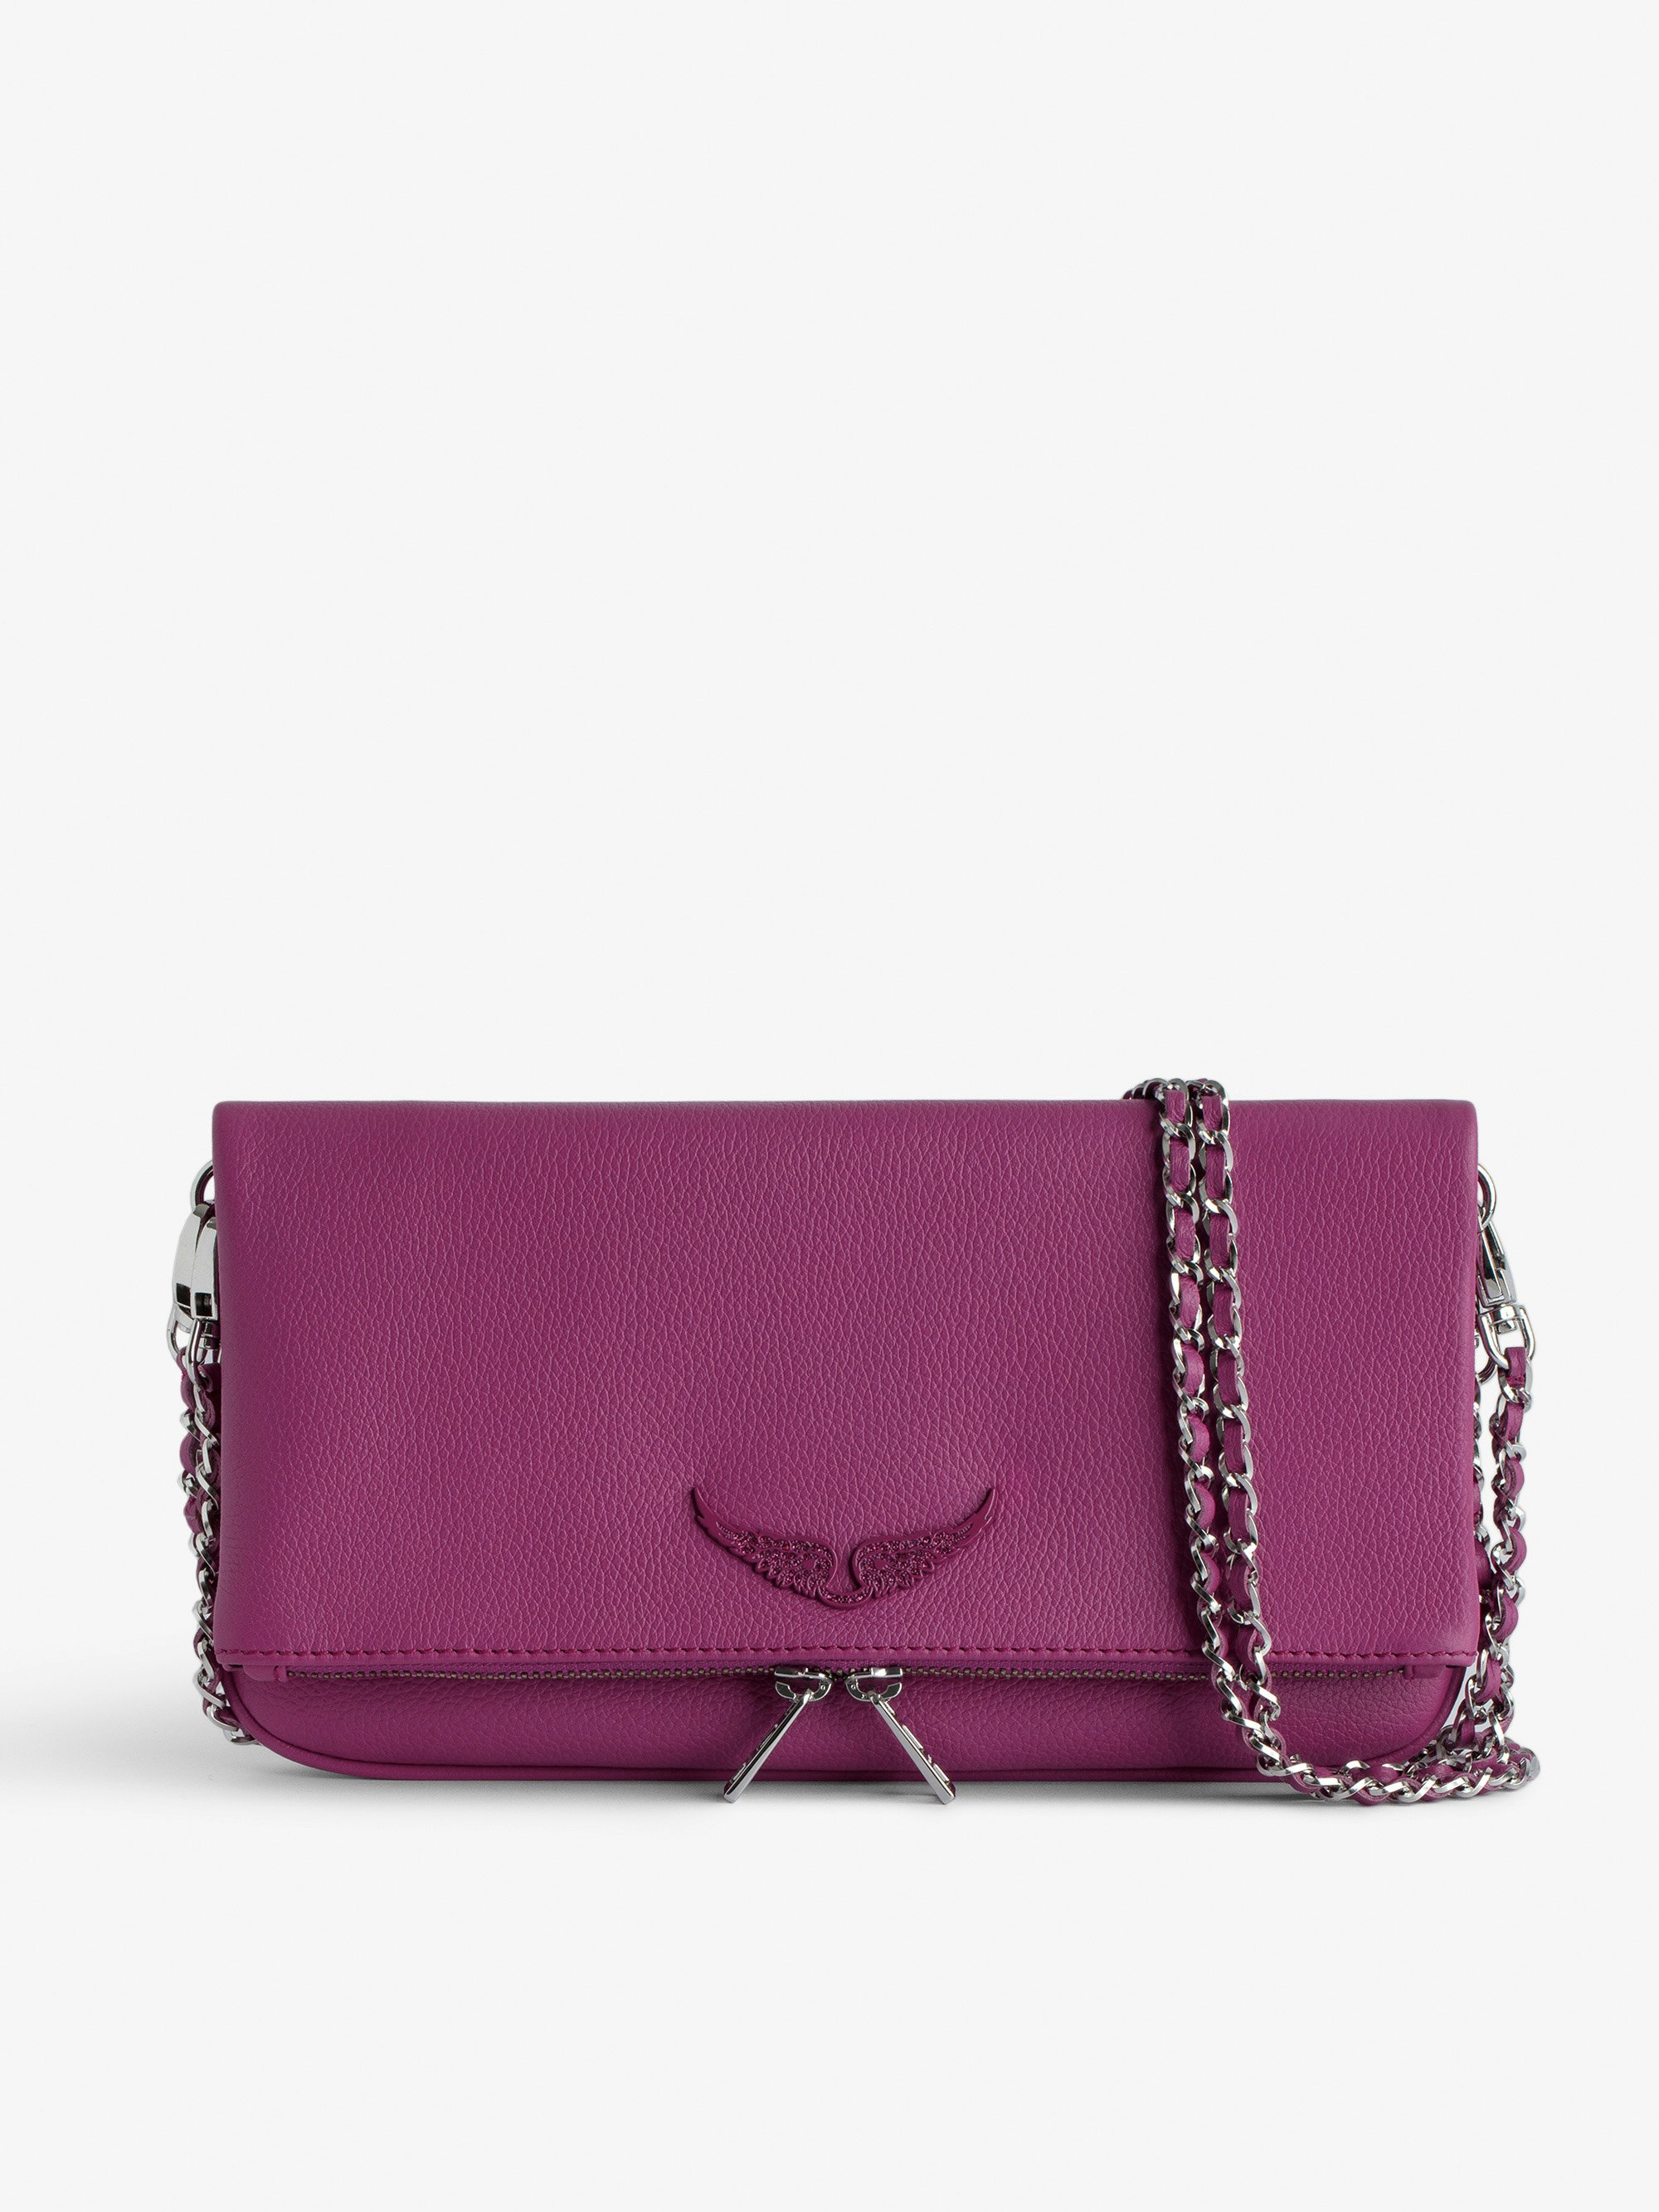 Rock Clutch - Women’s fuchsia grained leather clutch with double leather and metal chain strap.